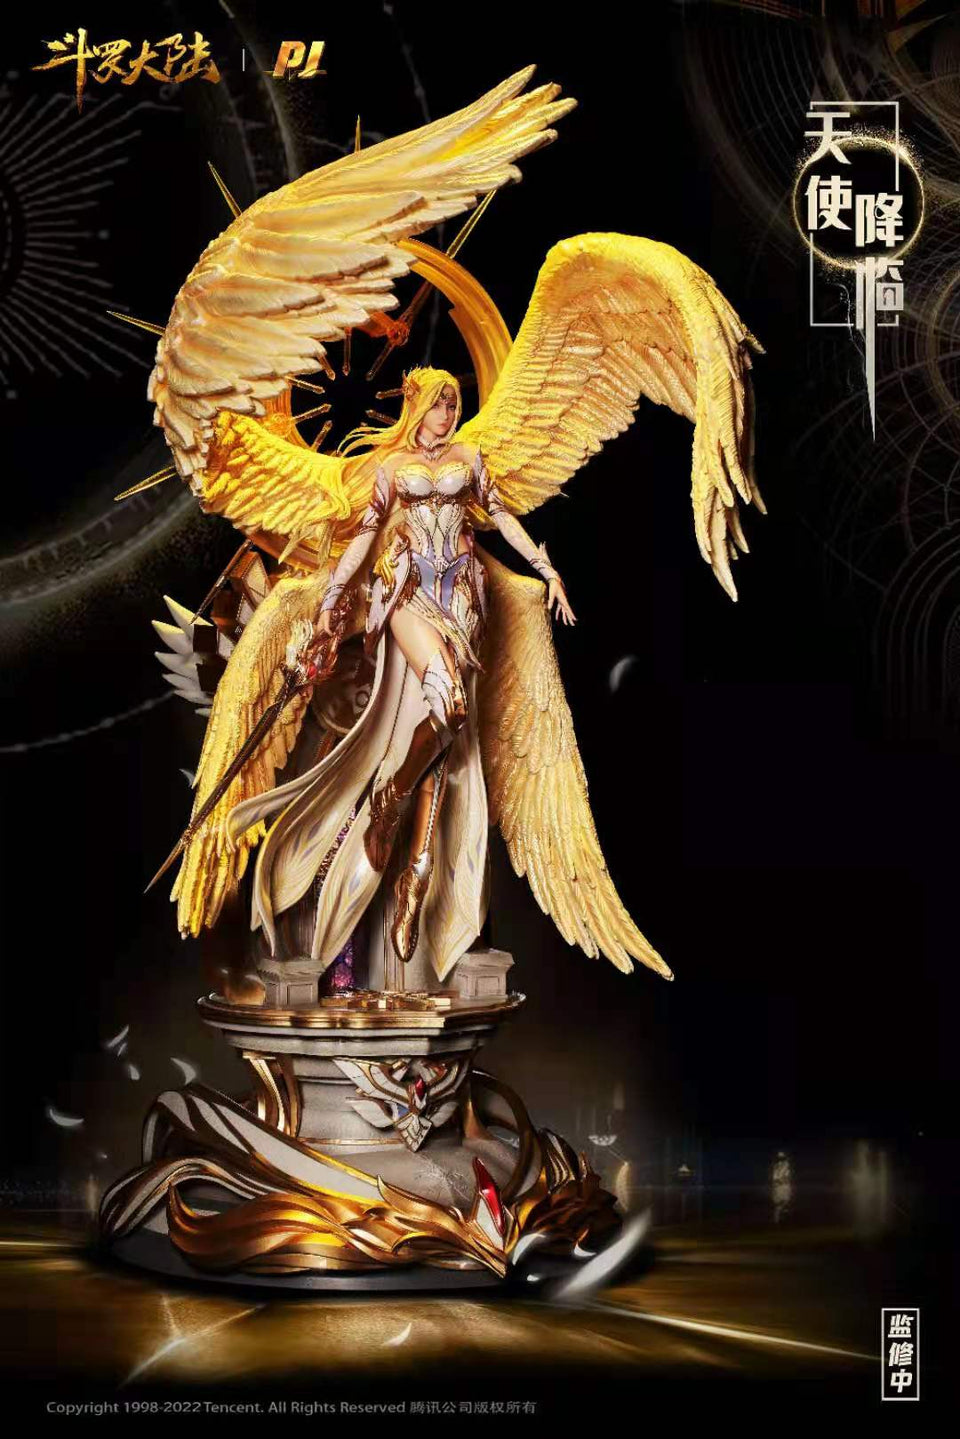 PJ Studio The Second Bullet (Angel Comes) 1/4 Scale Statue